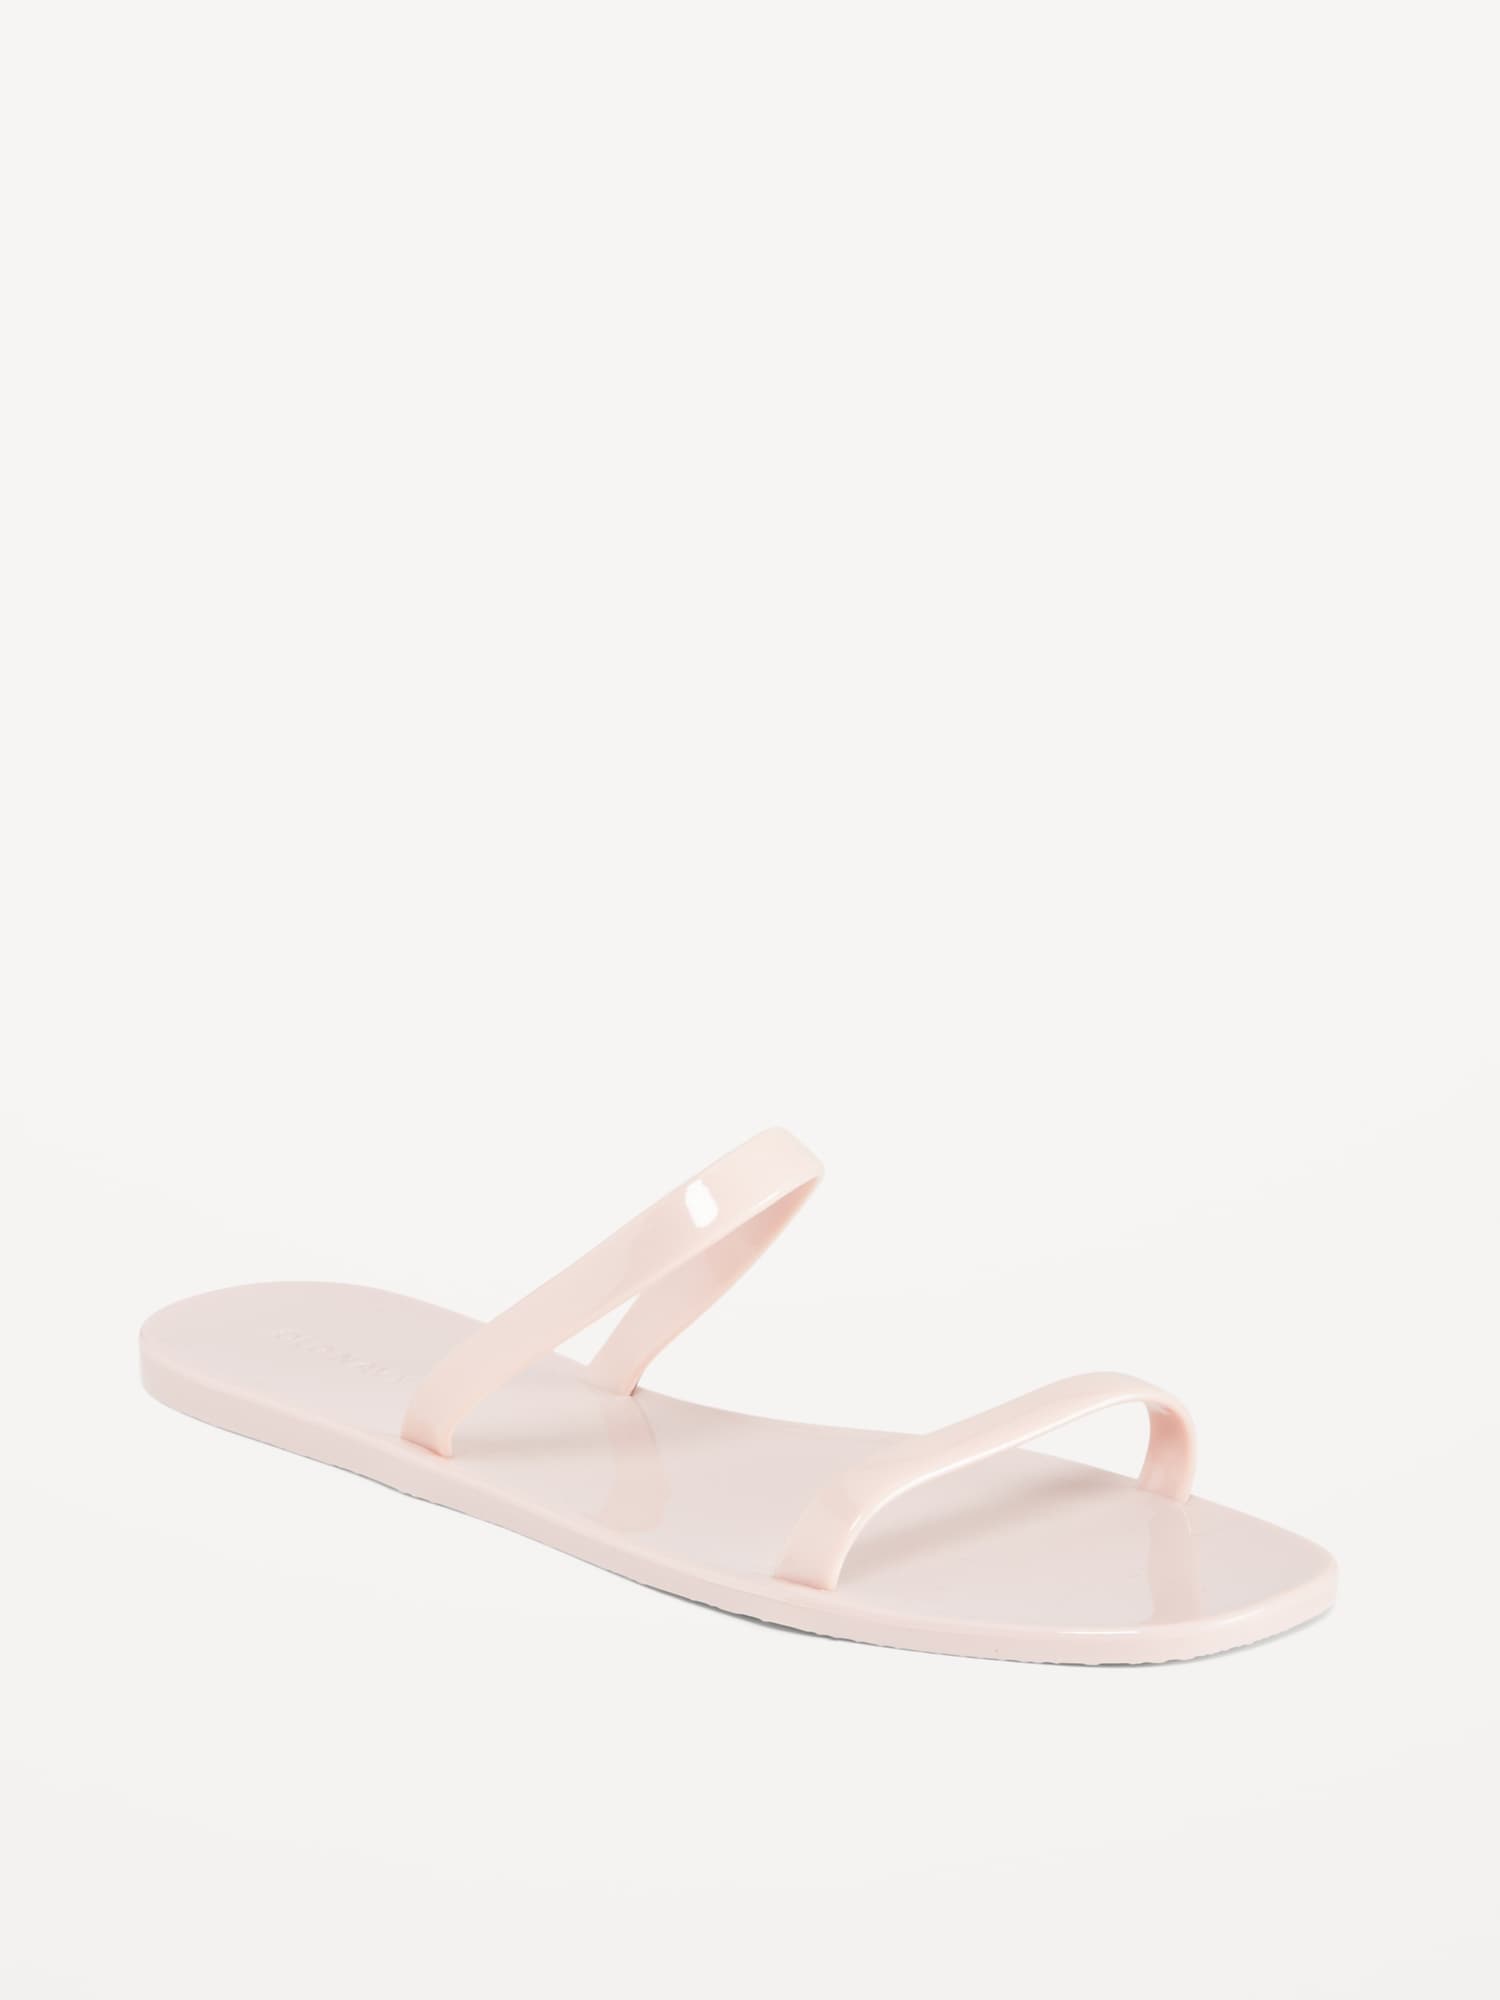 Old Navy Shiny-Jelly Slide Sandals for Women pink. 1